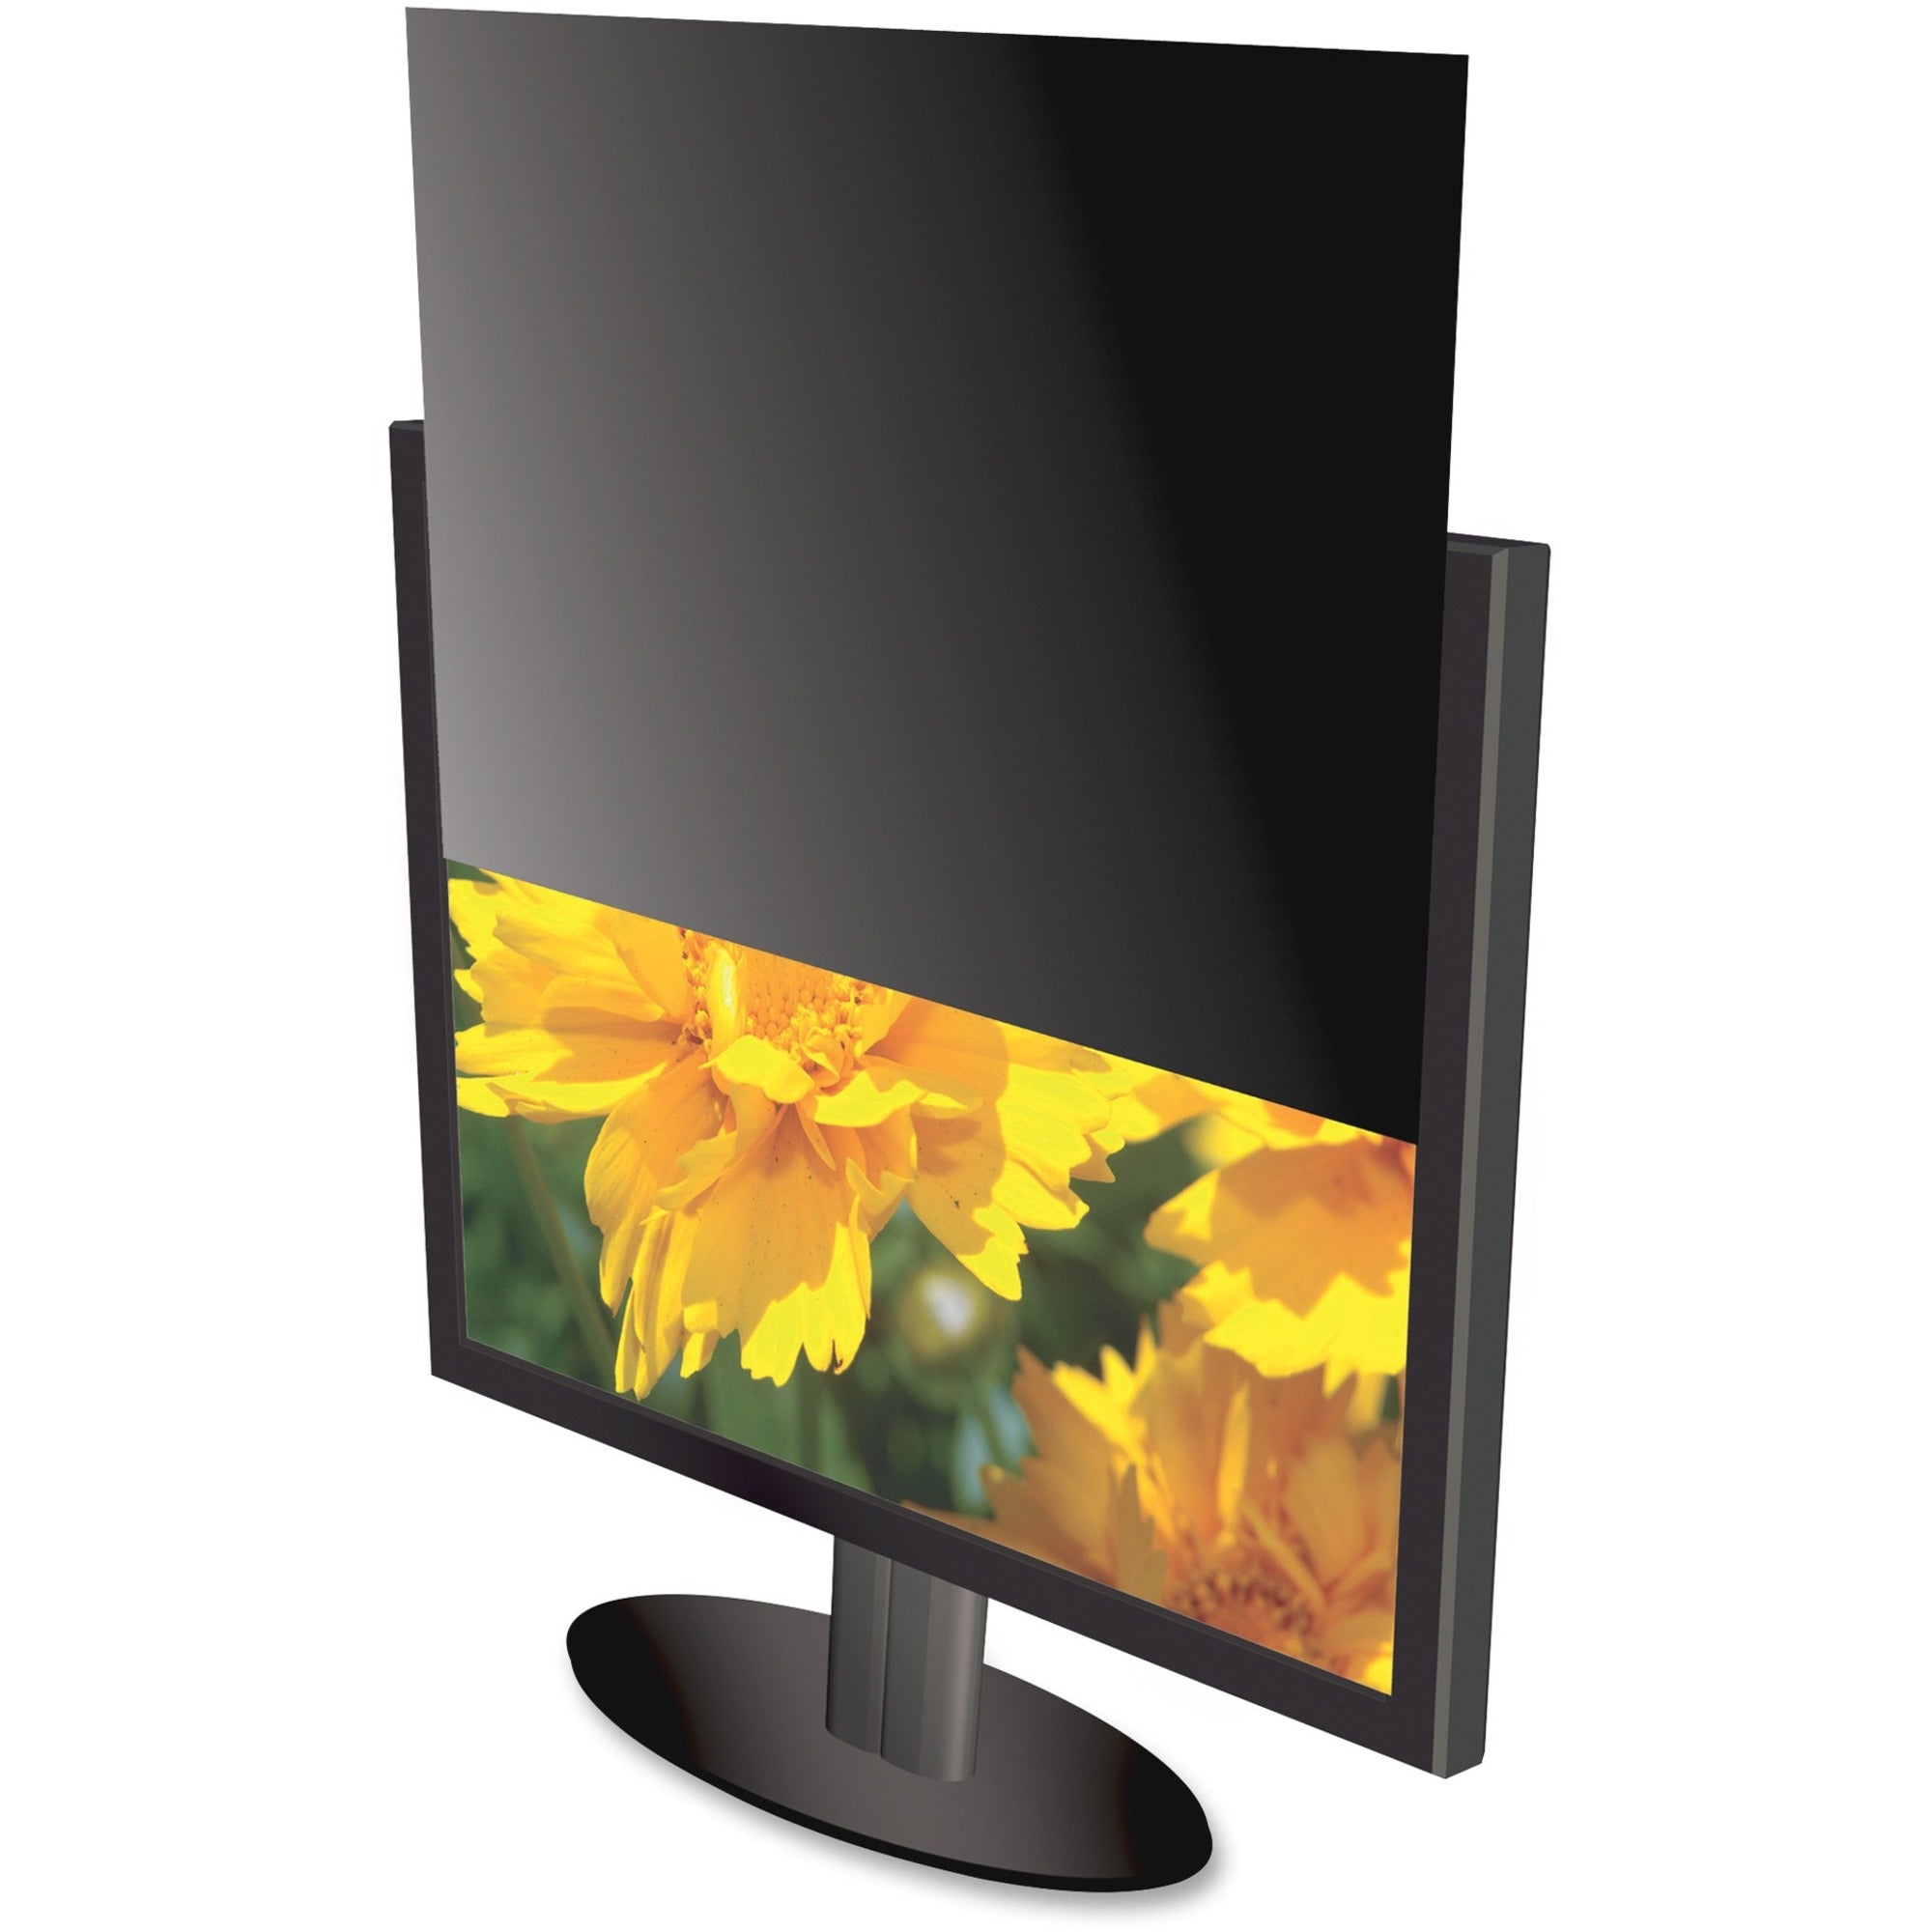 Kantek 16:9 Ratio LCD Monitor Privacy Screen Black - For 20" Widescreen Monitor - 1 Pack - 